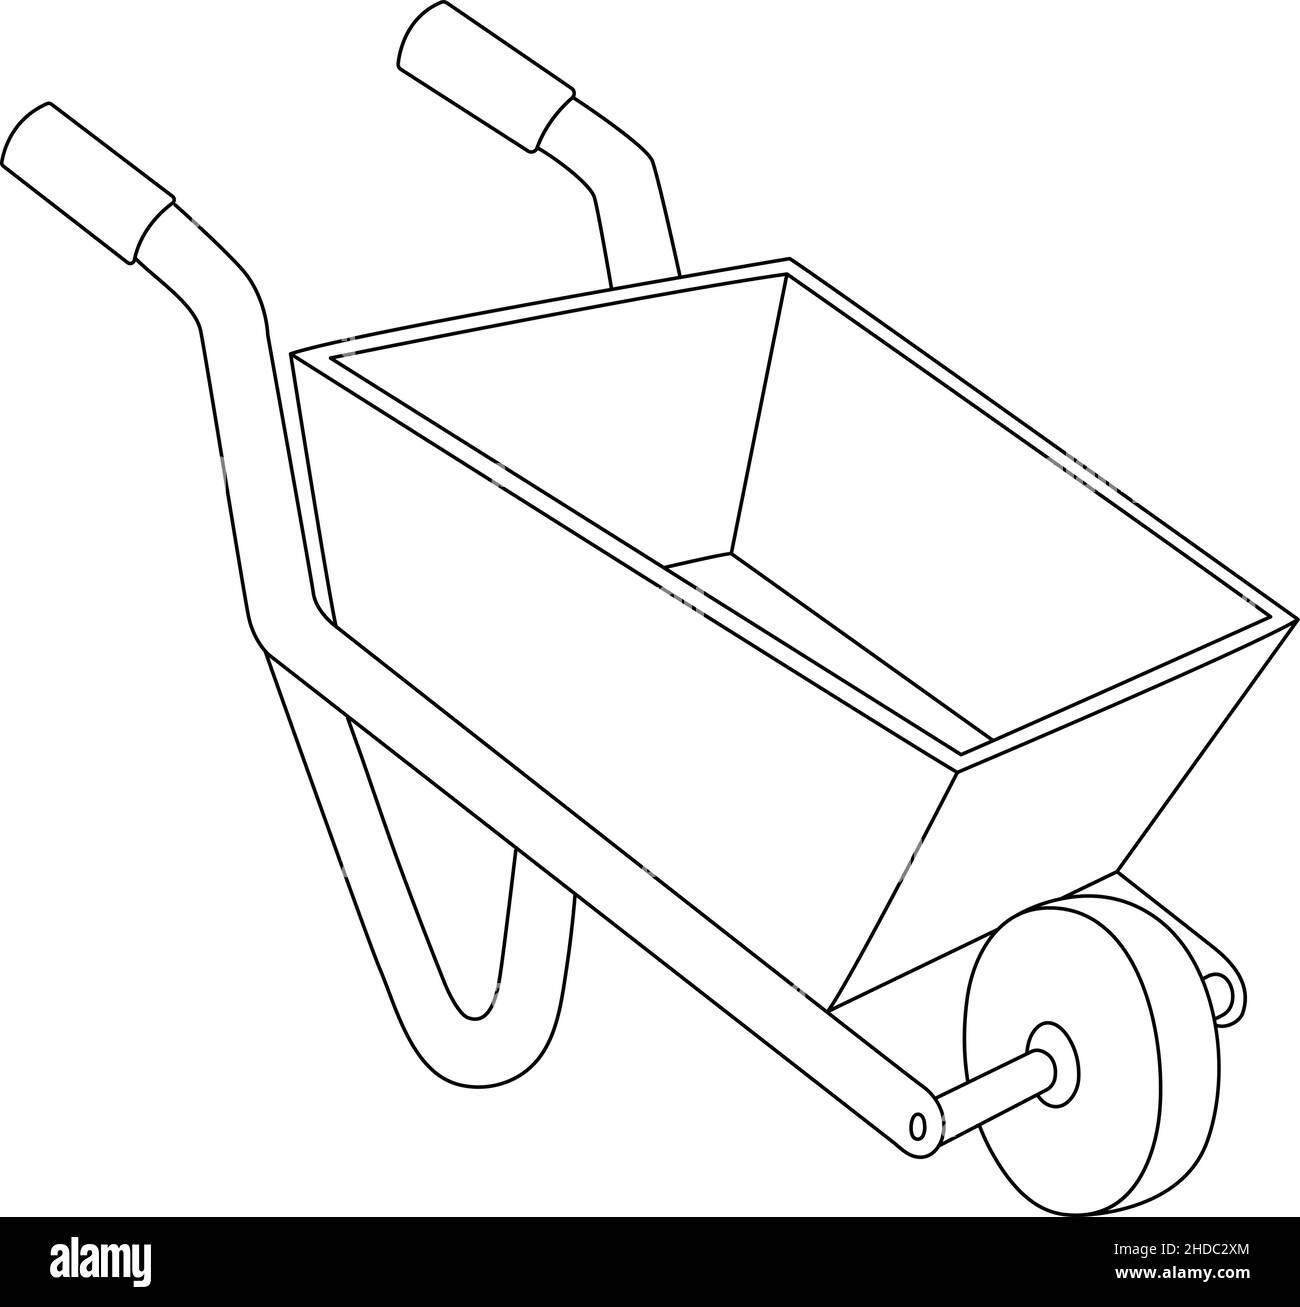 Wheelbarrow coloring page for kids stock vector image art